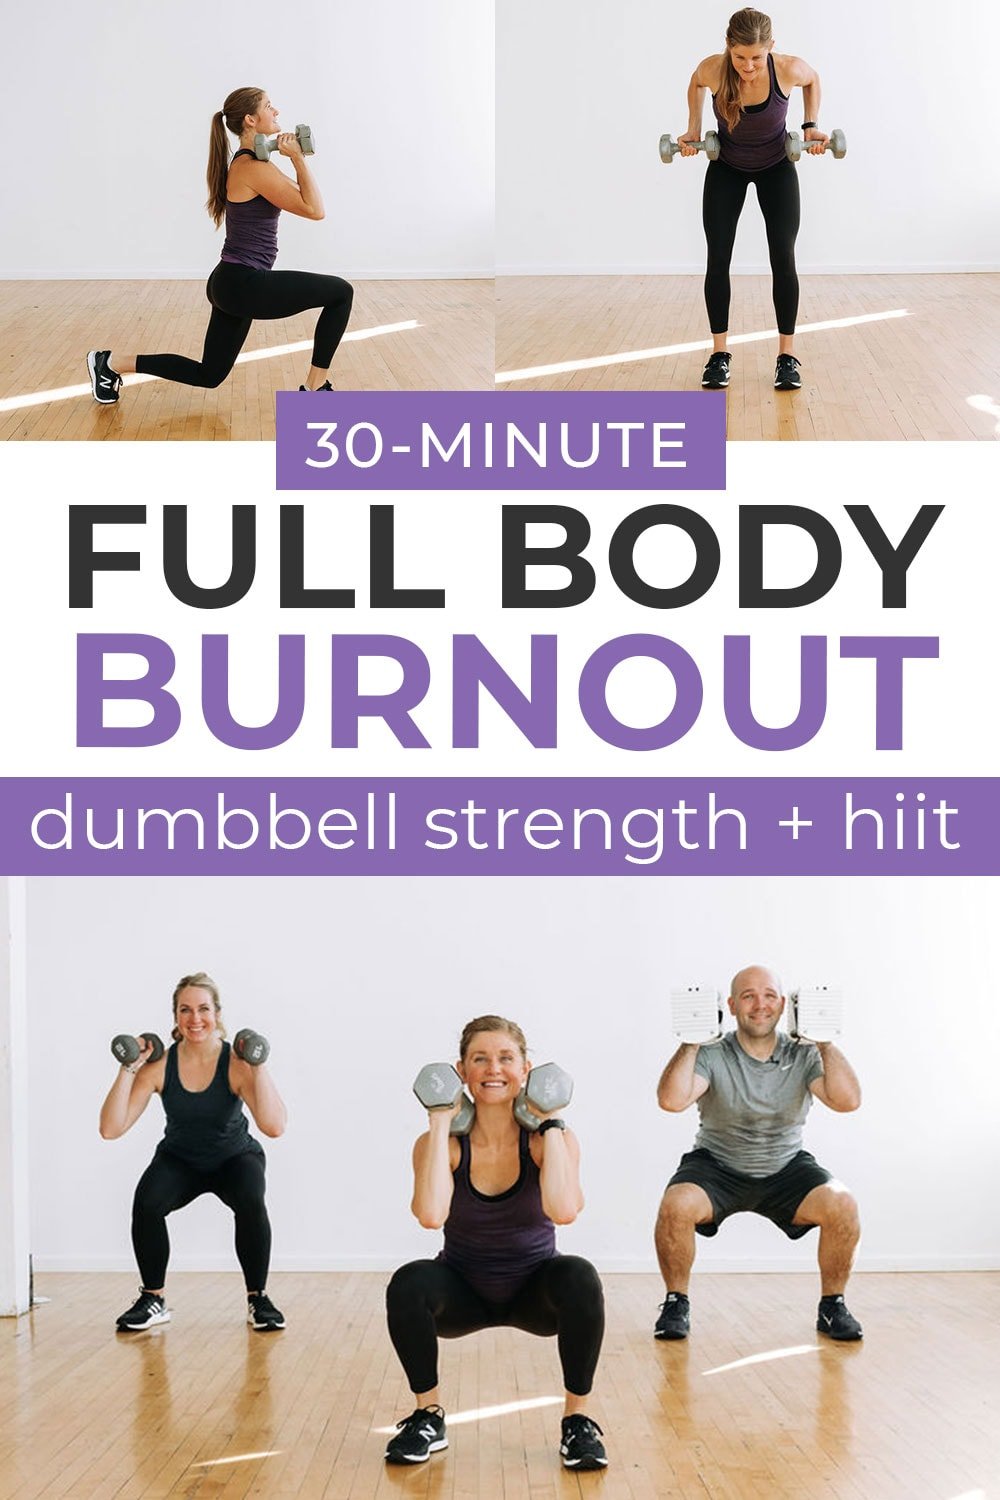 5 Day Full Body Workout Dumbbell At Home for Push Pull Legs